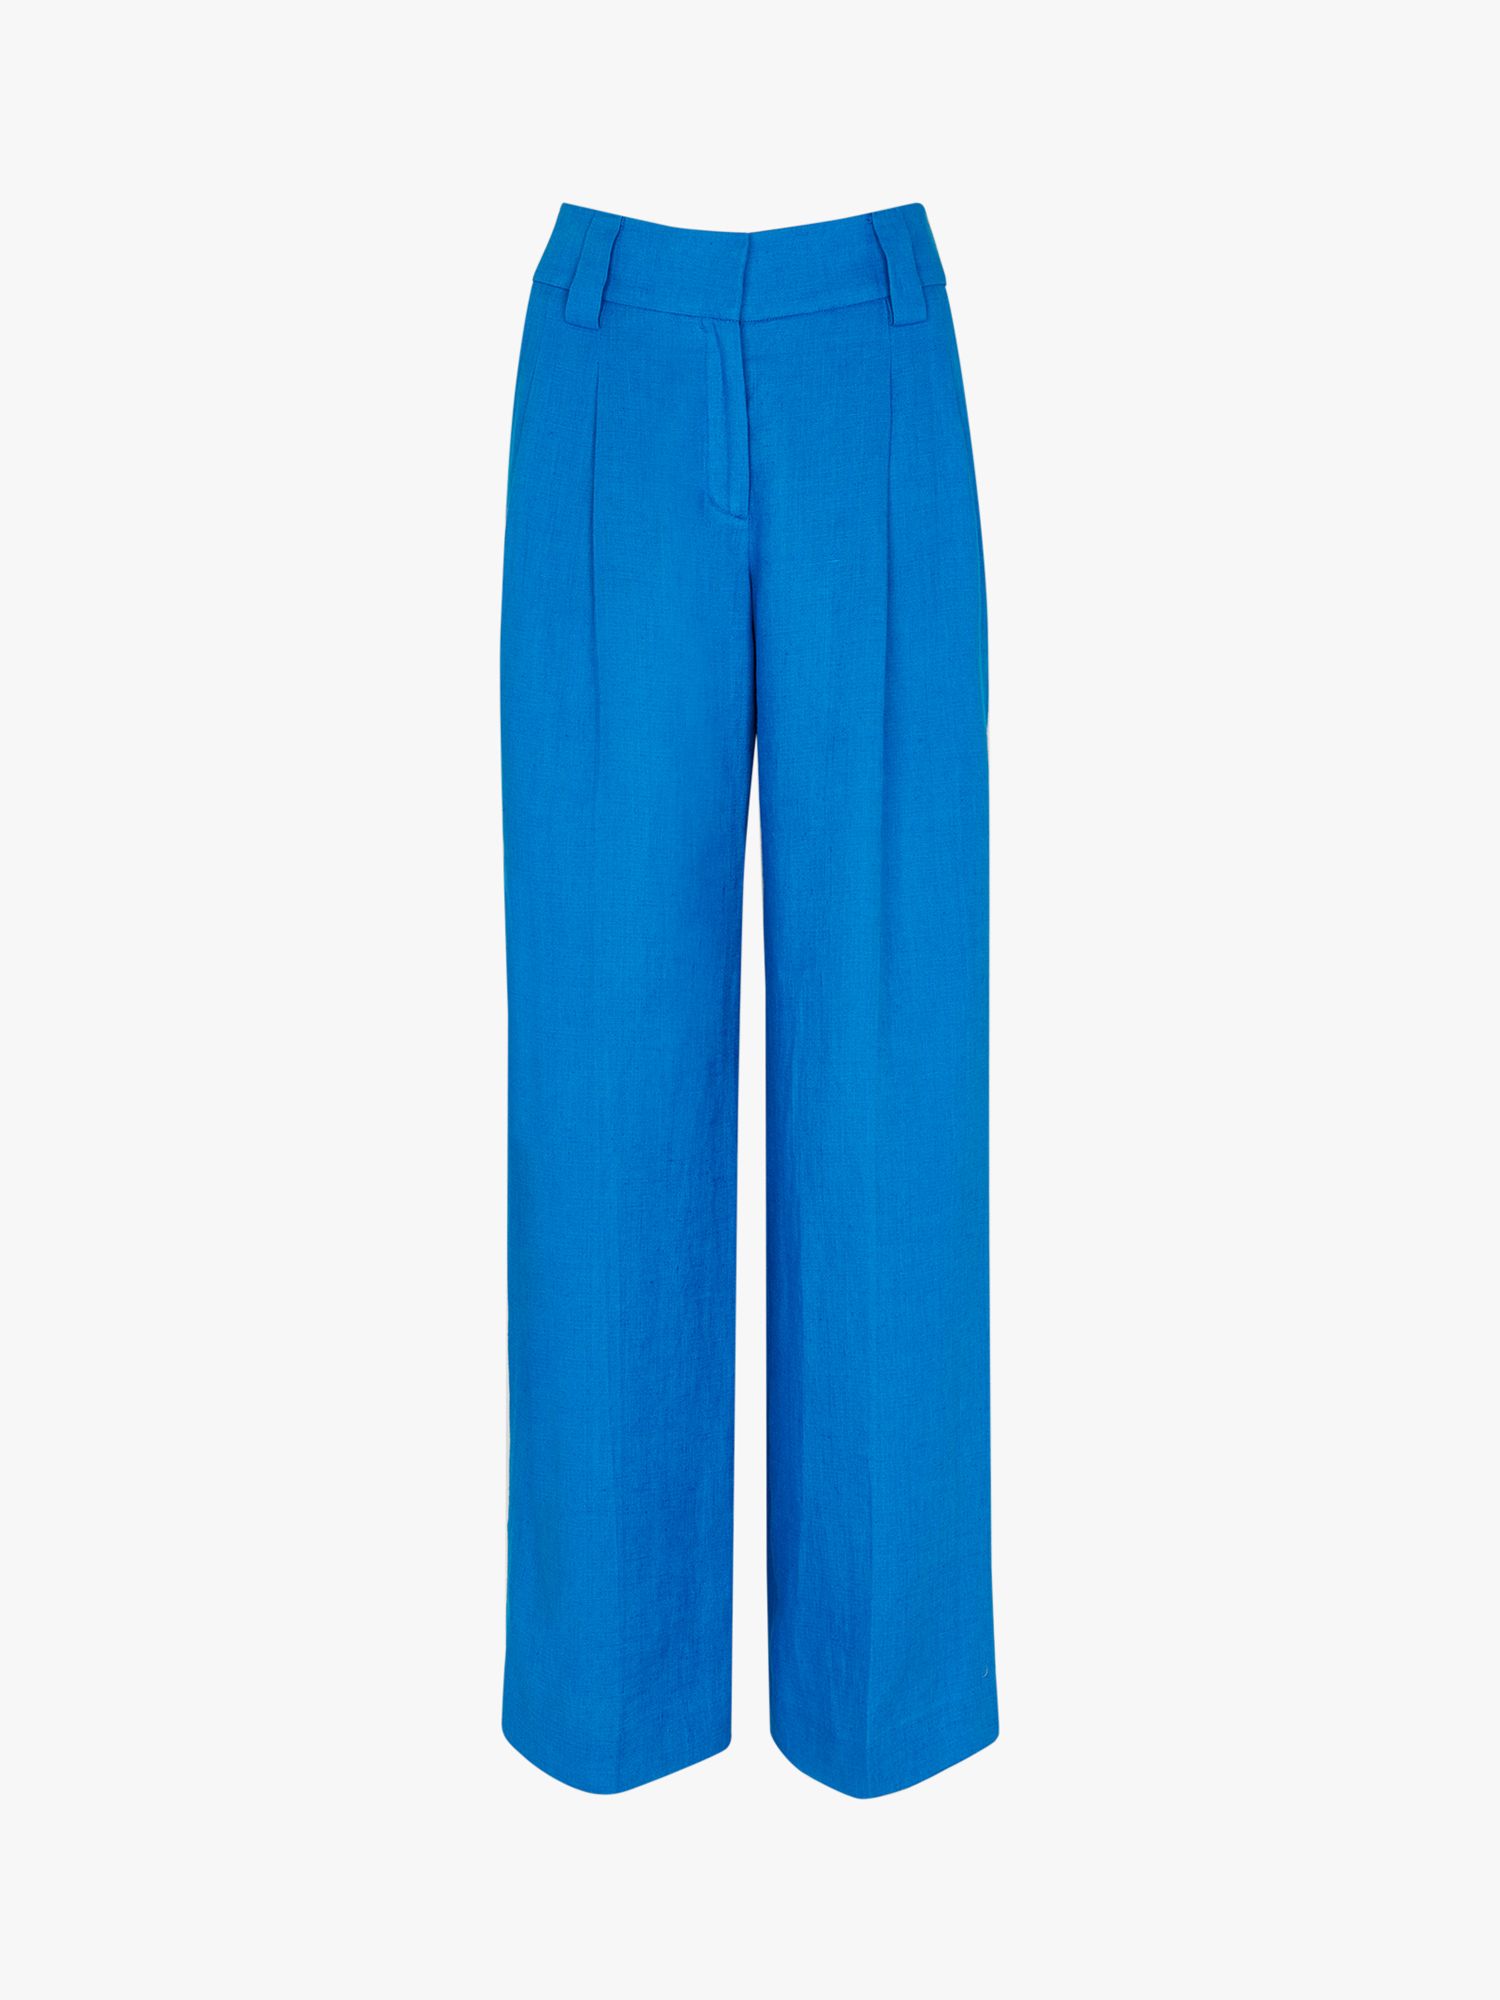 Whistles Leonie Tailored Linen Trousers, Blue at John Lewis & Partners